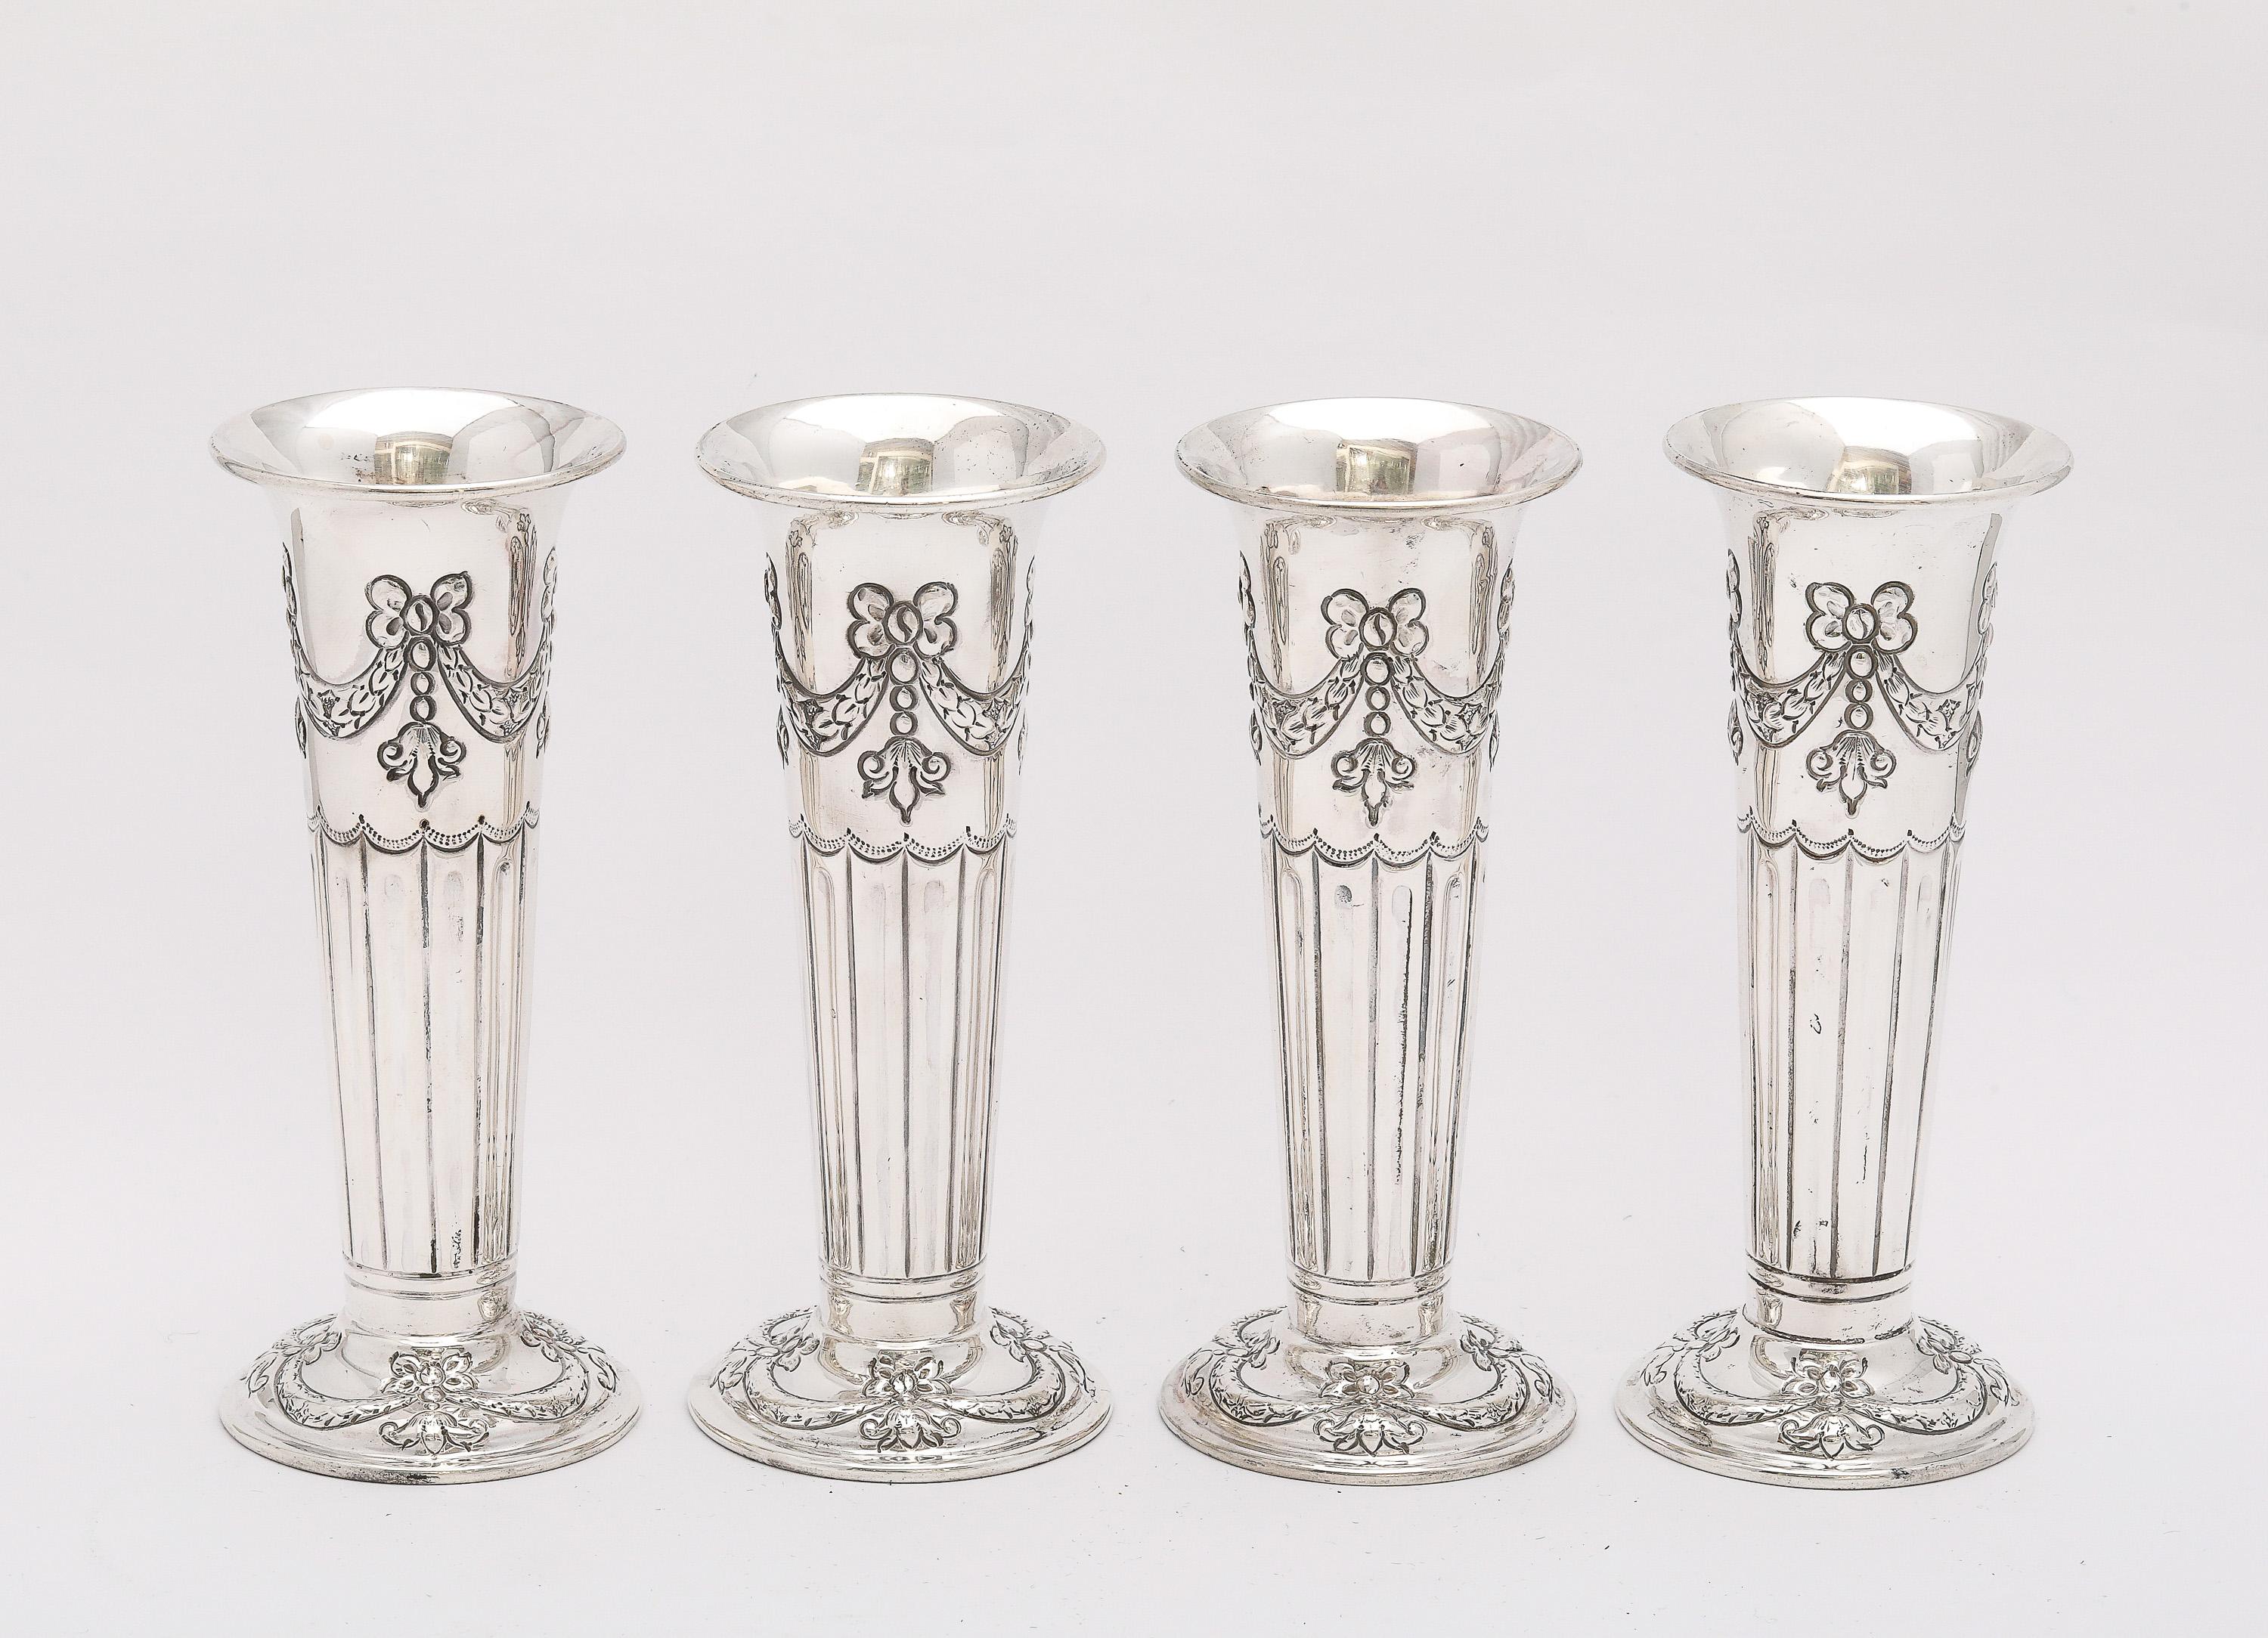 Rare, Victorian Period, Neoclassical Style, set of four (4), matching, sterling silver bud vases, Birmingham, England, year-hallmarked for 1896, Henry Wright Atkin (of Atkin Bros. Co.) - maker. The upper portion of each vase and the base of each